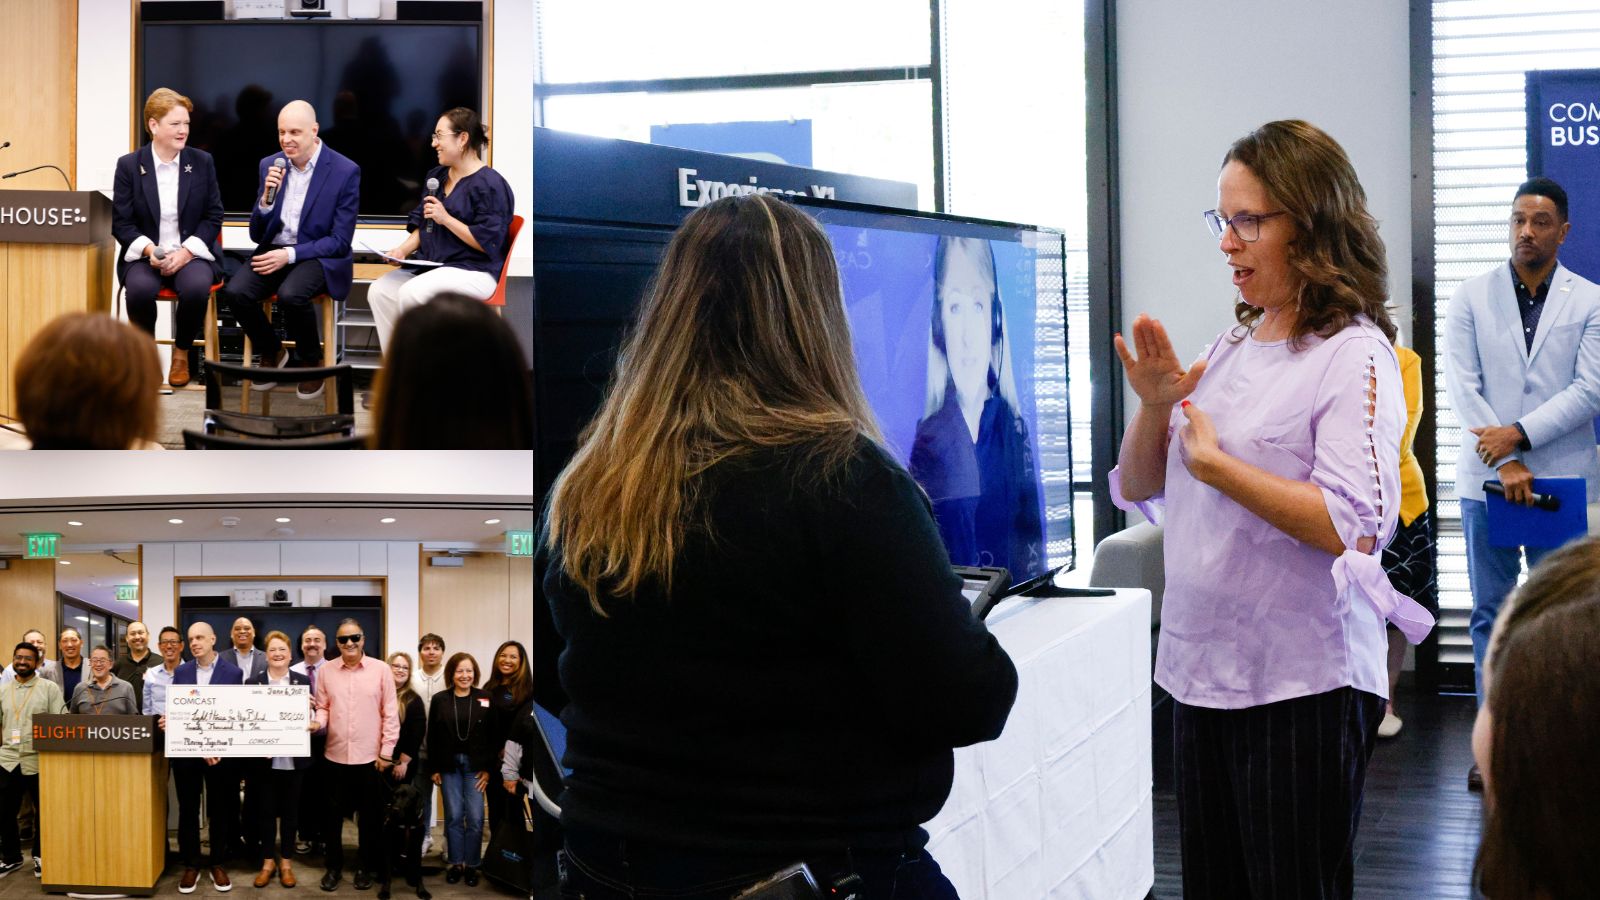 Comcast California Announces Live American Sign Language Interpreting Services at Several Bay Area Xfinity Store Locations